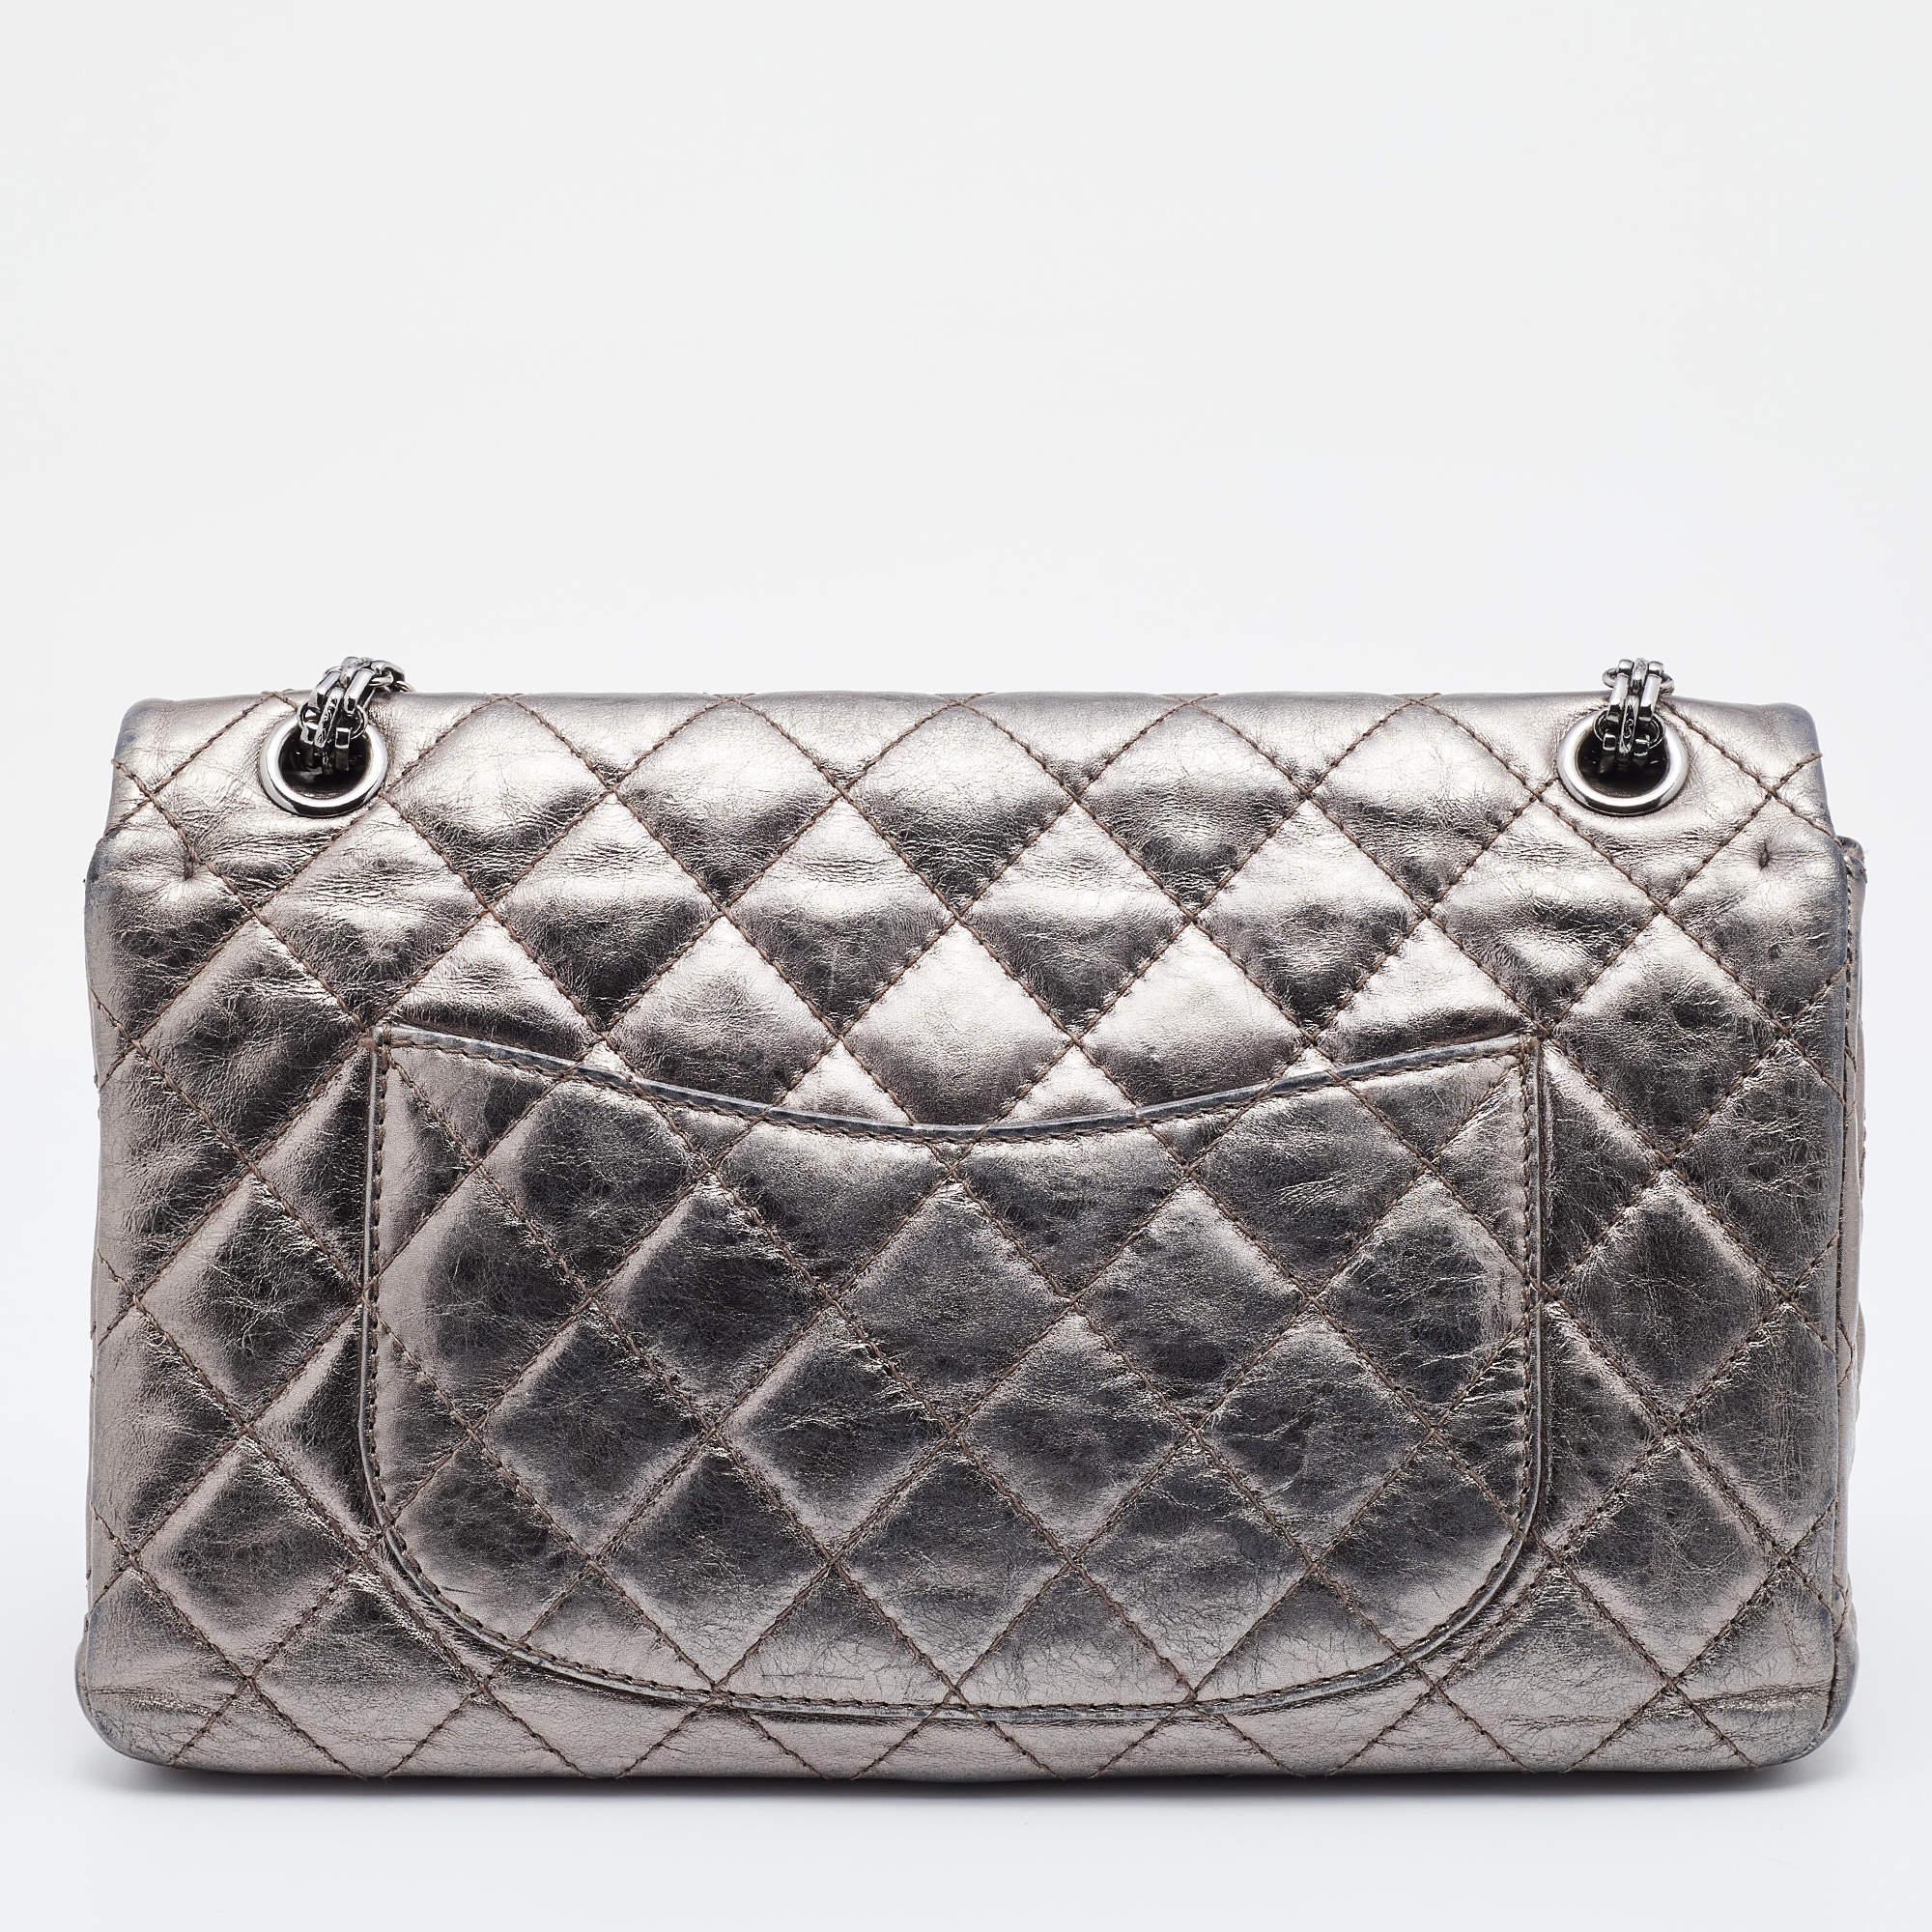 Chanel's Flap Bags are iconic and noteworthy in the history of fashion. Hence, this Reissue 2.55 Classic 226 is a buy that is worth every bit of your splurge. Exquisitely crafted from metallic grey leather, it bears the signature quilt pattern and